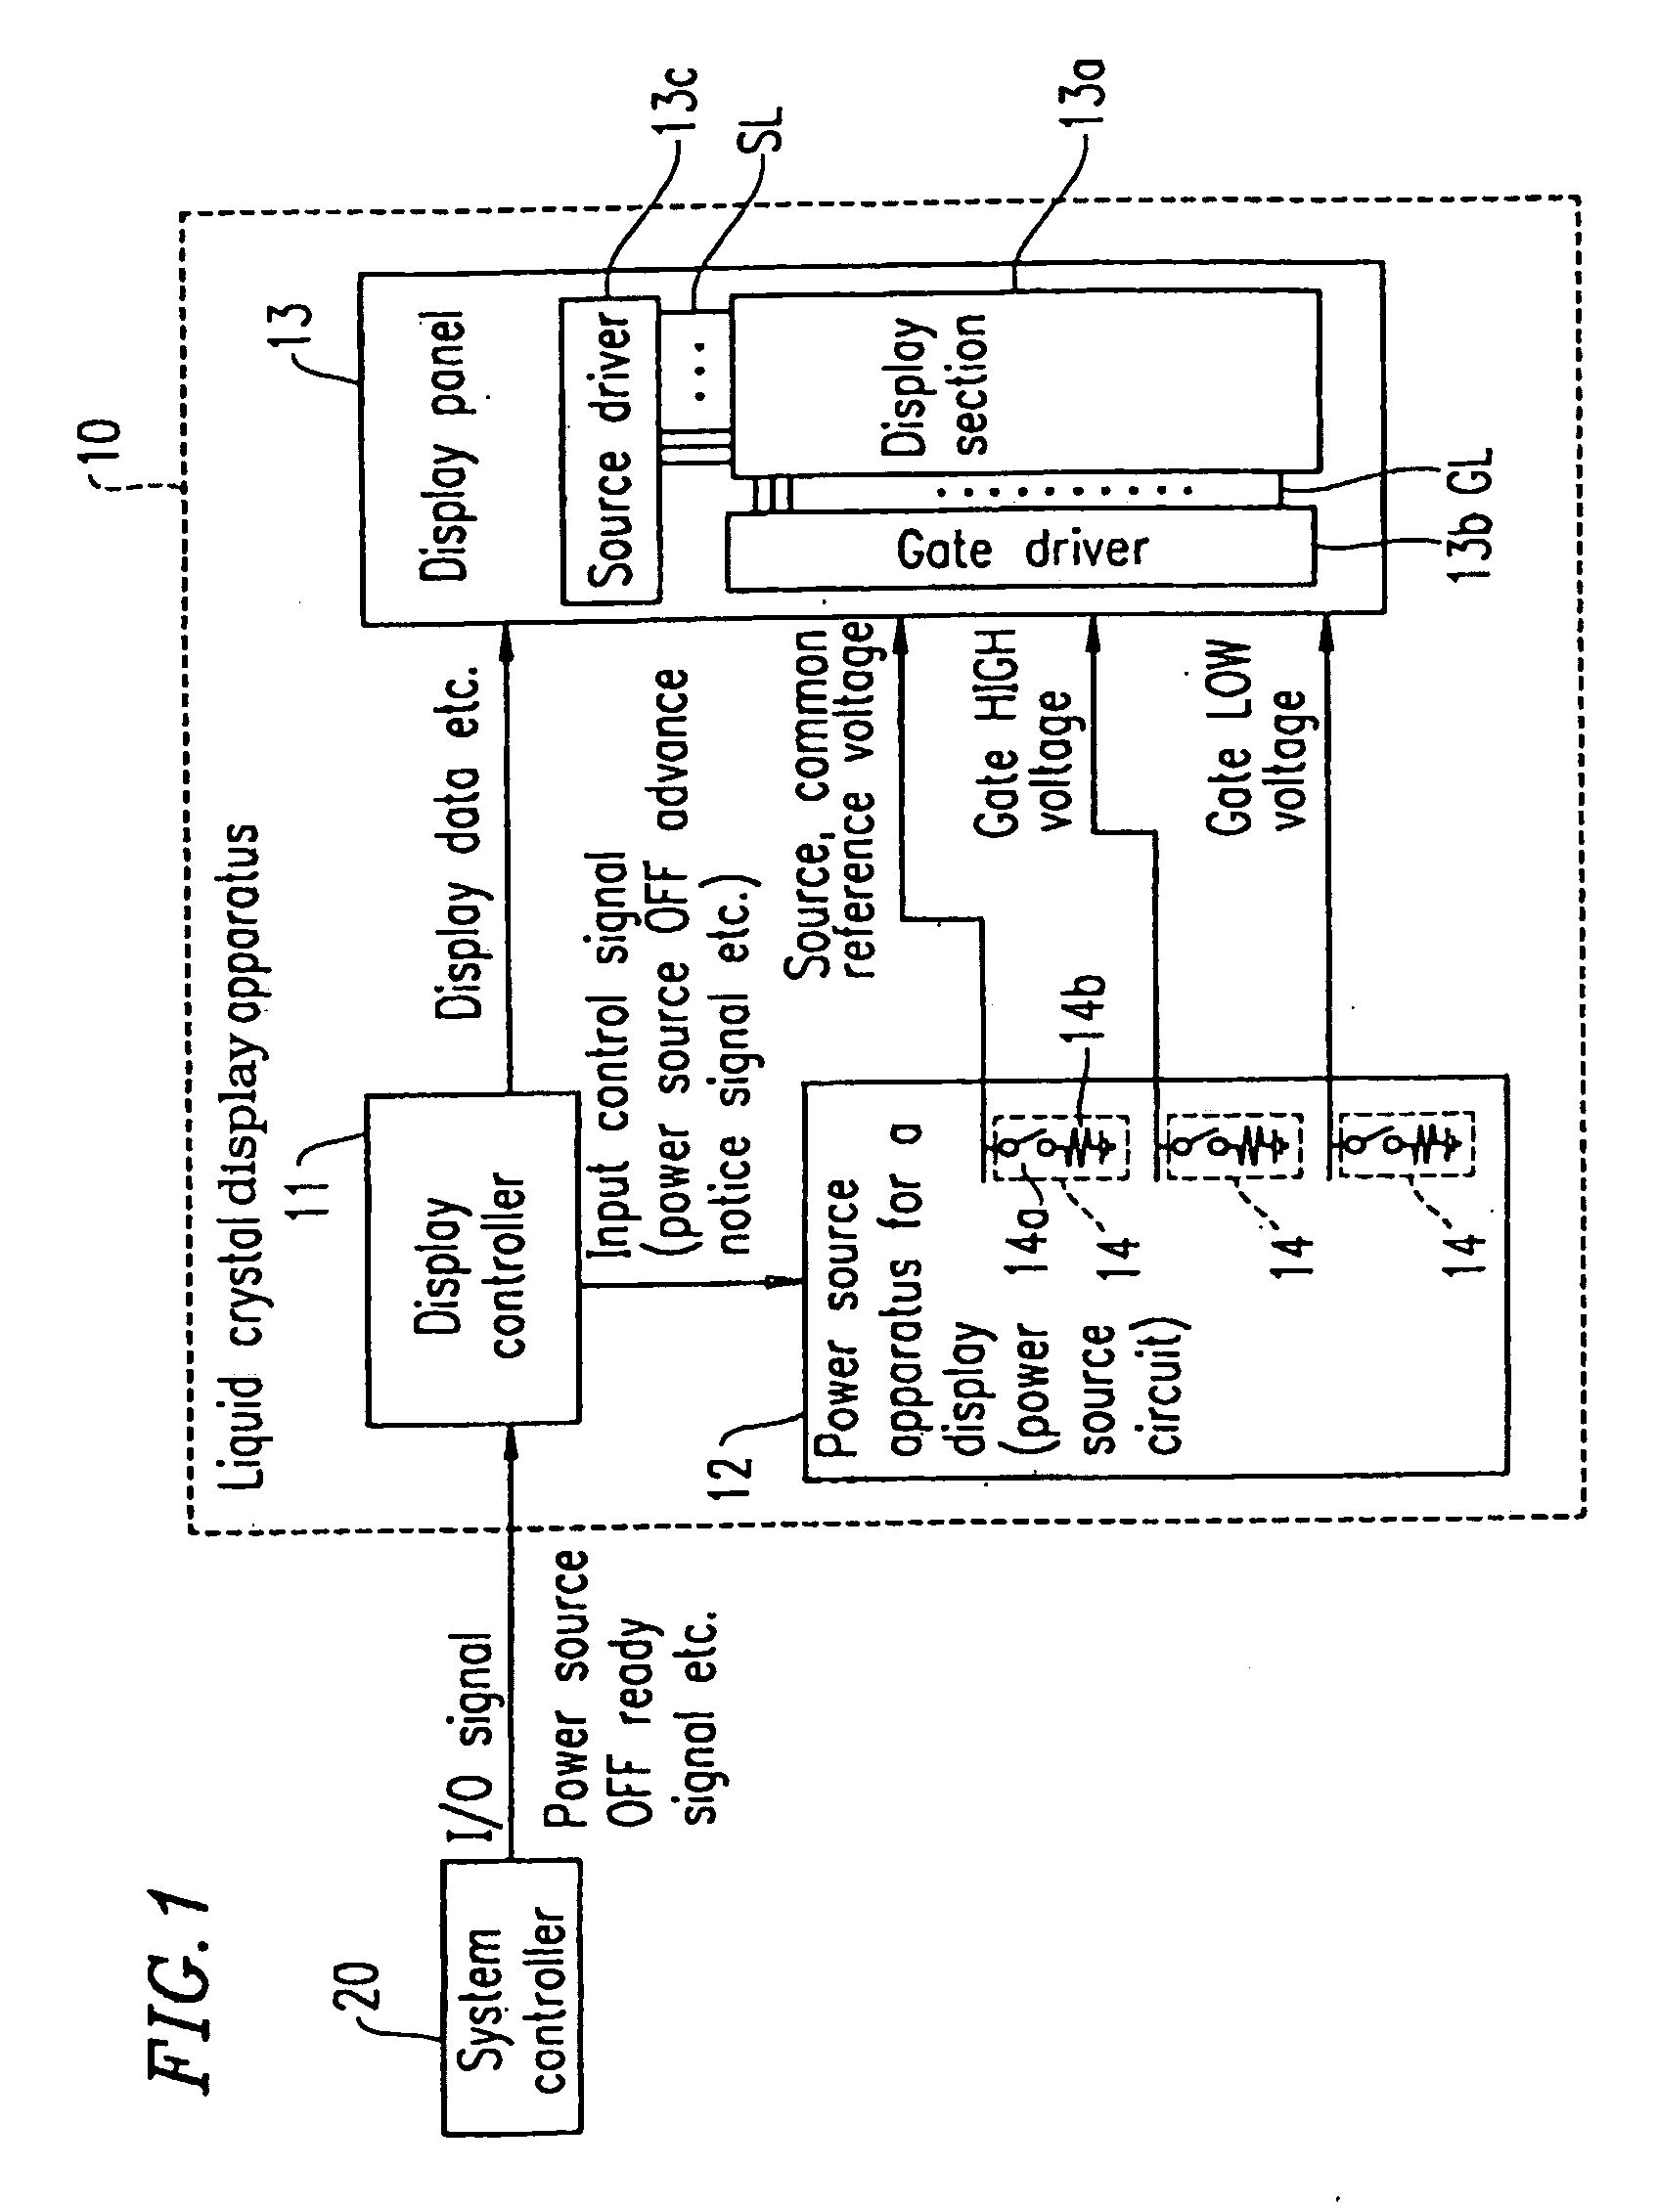 Power source apparatus for display and image display apparatus